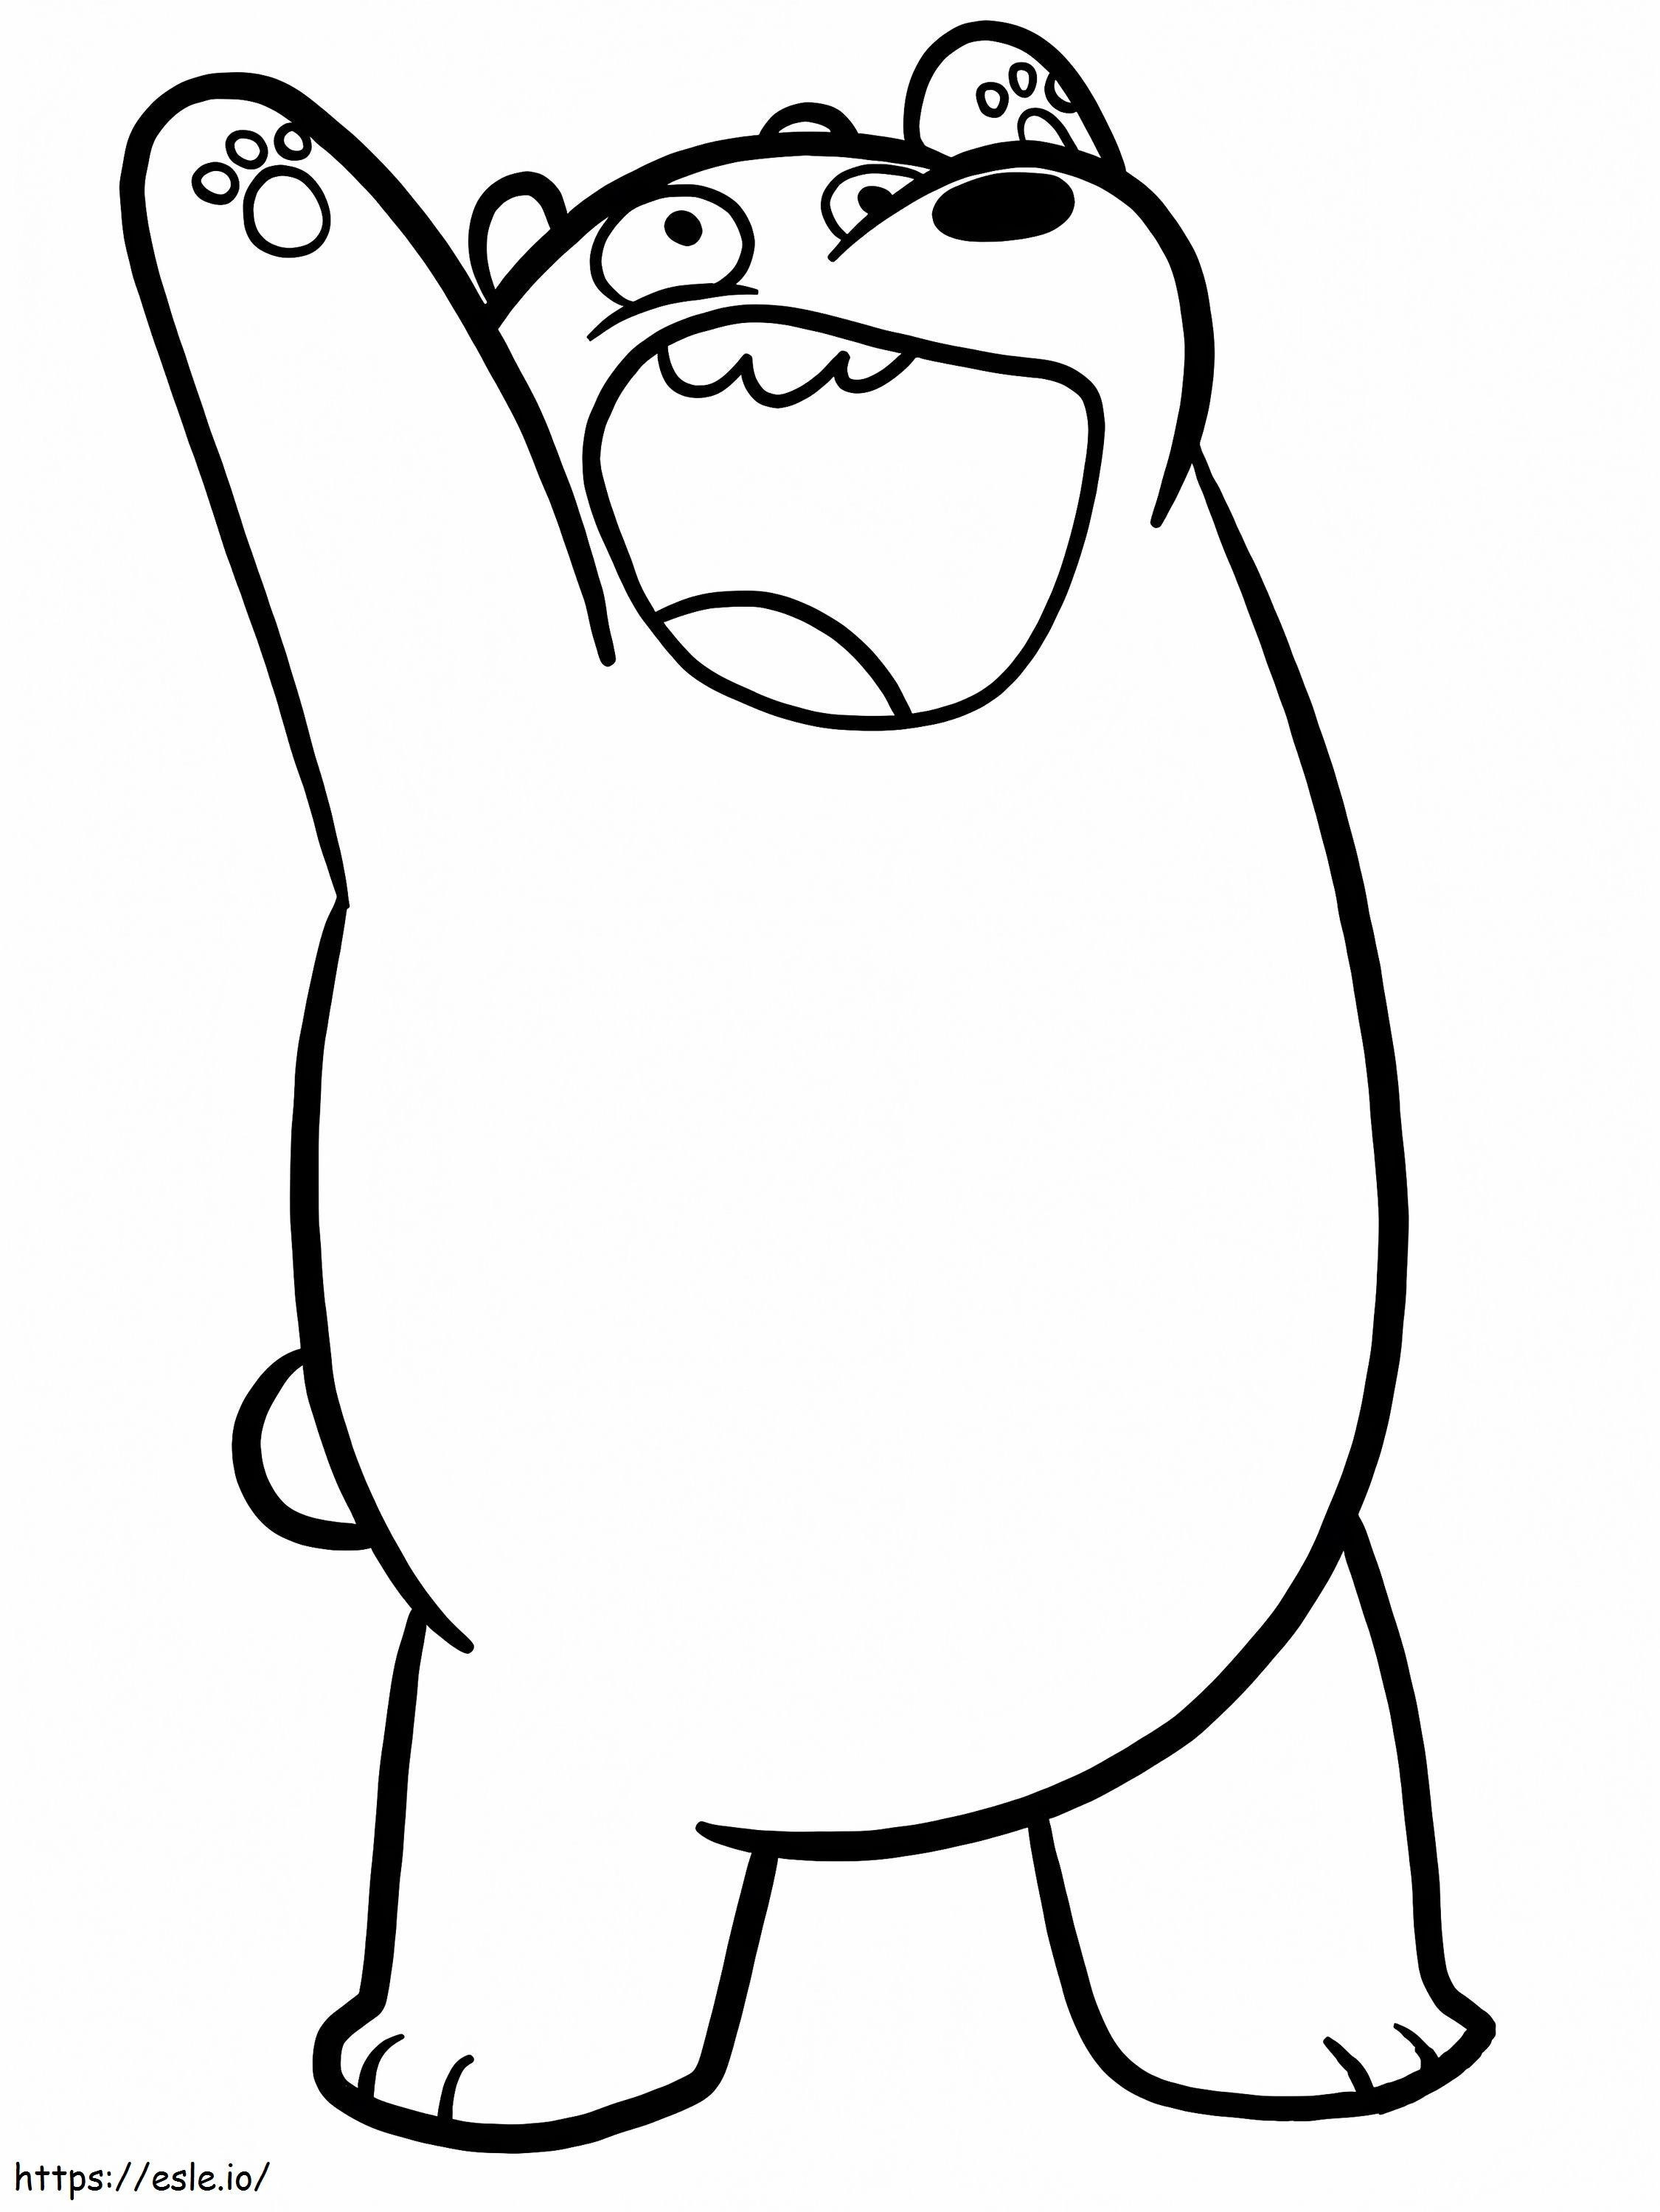 Happy Grizzly coloring page